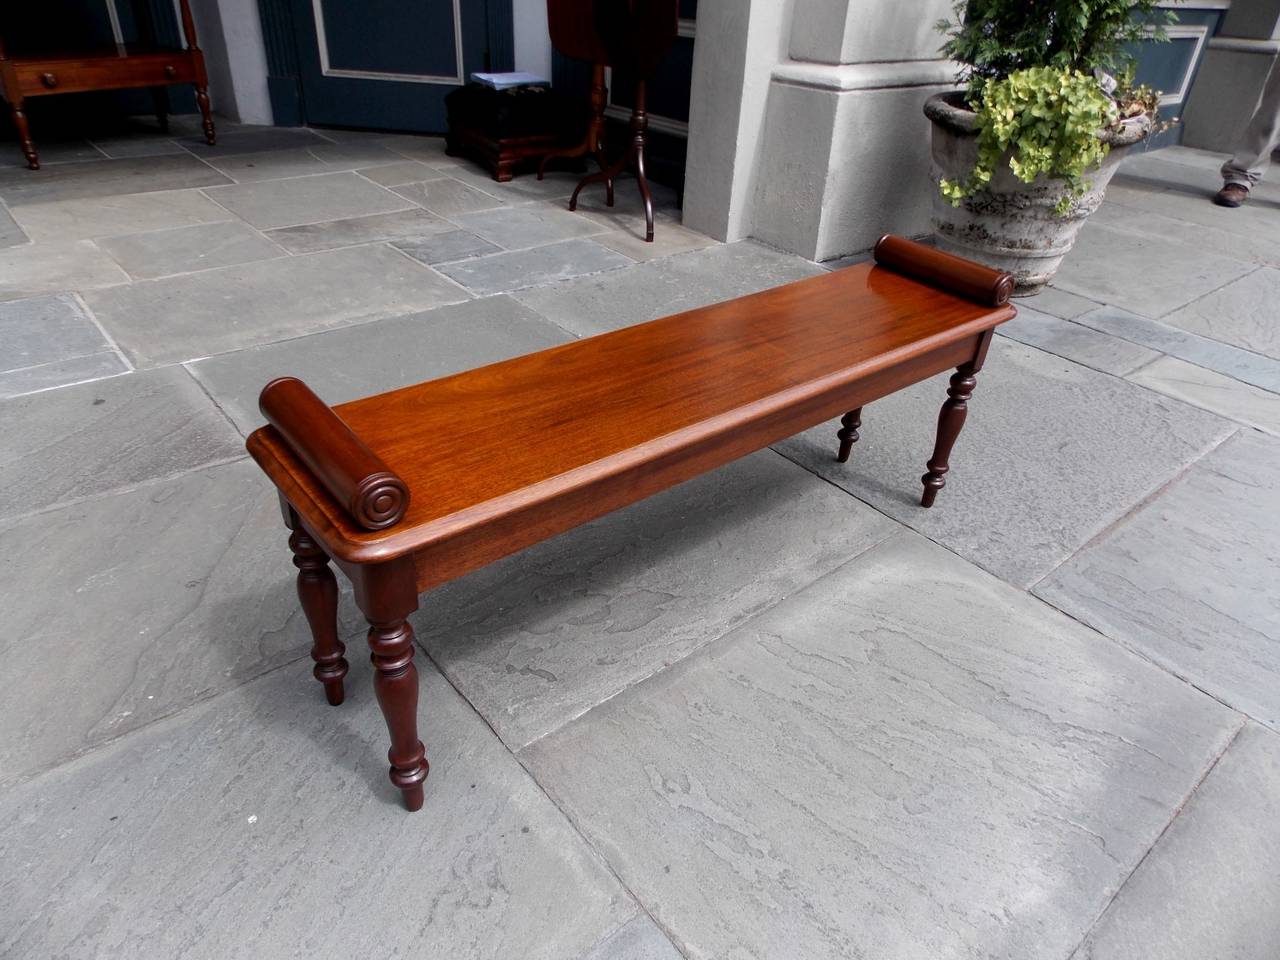 English Regency mahogany bench with flanking horizontal pillars, one board seat, and terminating on turned bulbous legs, Early 19th Century.